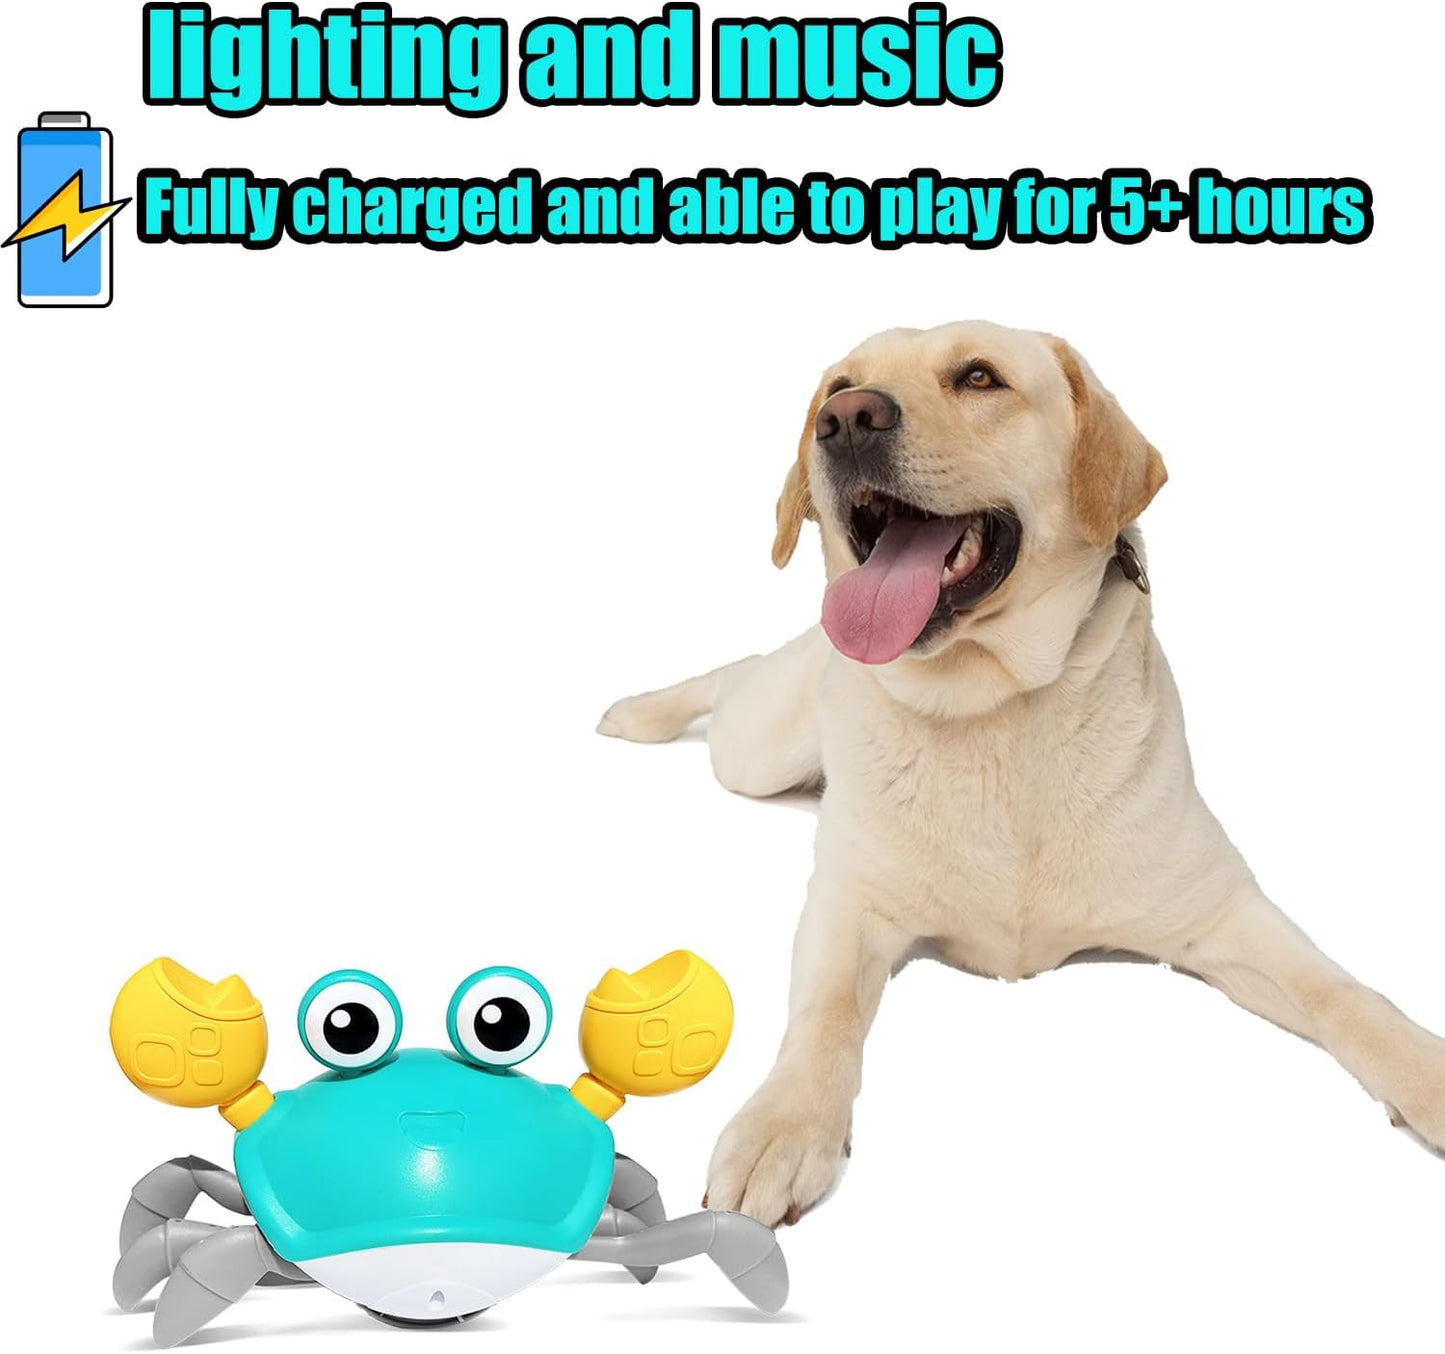 HONGID Crawling Crab Dog Toys,Escaping Crab Dog Toy with Obstacle Avoidance Sensor,Interactive Dog Toys with Music Sounds & Lights for Dogs Cats Pets,Christmas Toy Gift for Puppy/Small/Medium Dogs